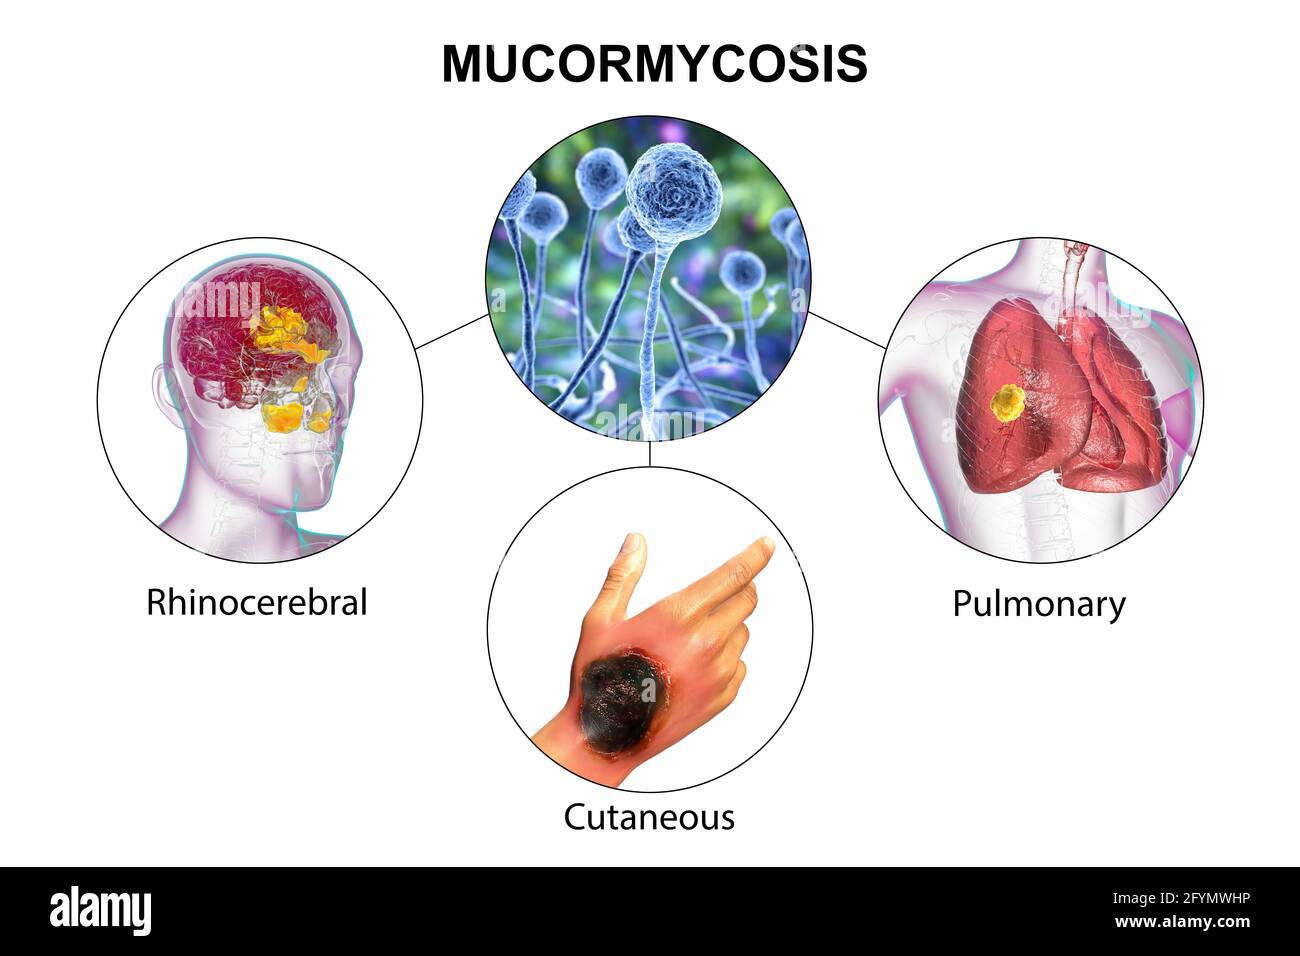 Clinical forms of mucormycosis, illustration Stock Photo